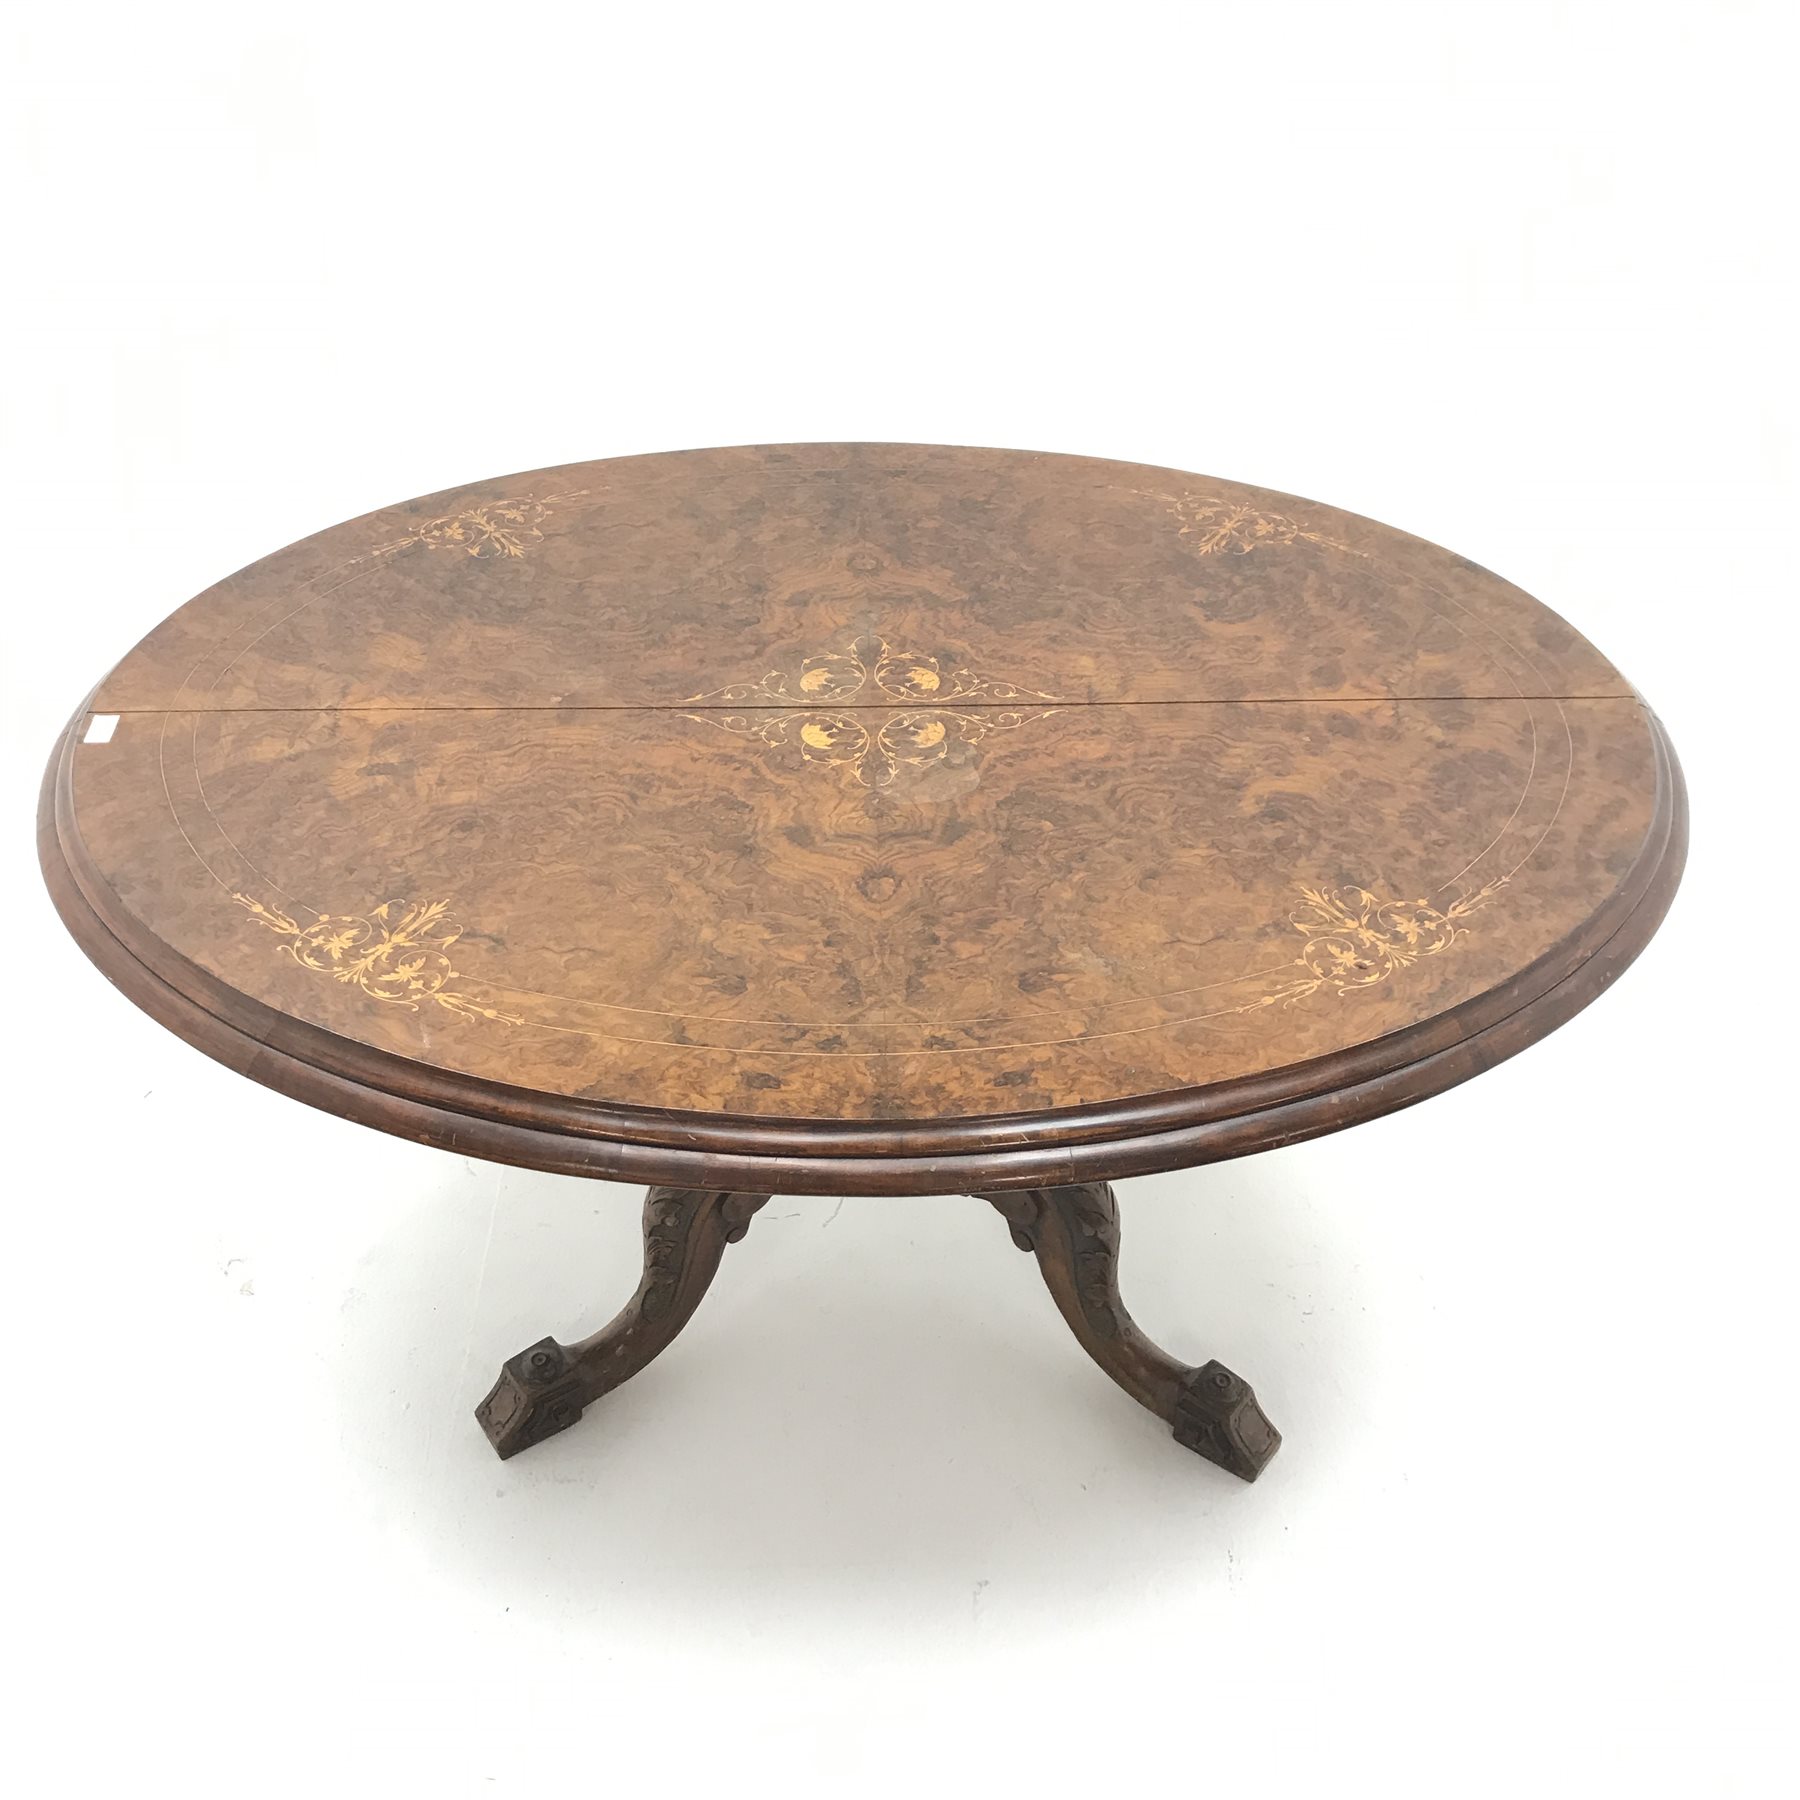 Victorian inlaid oval tilt top table, quadruple turned support with central finial on four acanthus - Image 2 of 6